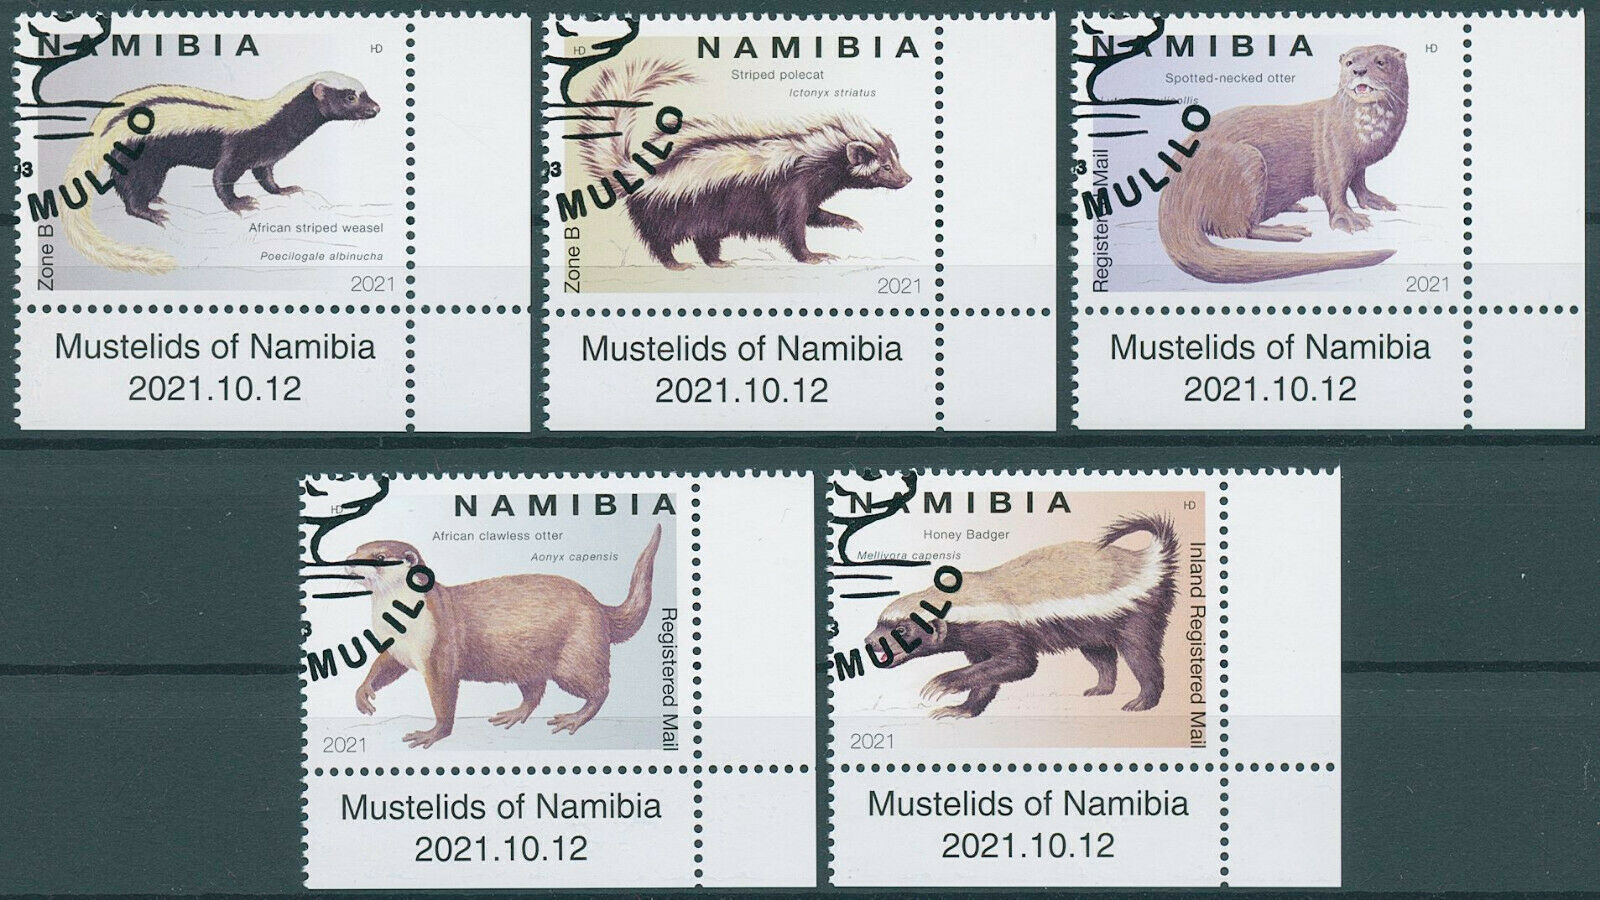 Namibia 2021 CTO Wild Animals Stamps Mustelids Weasels Badgers Otters 5v Set C